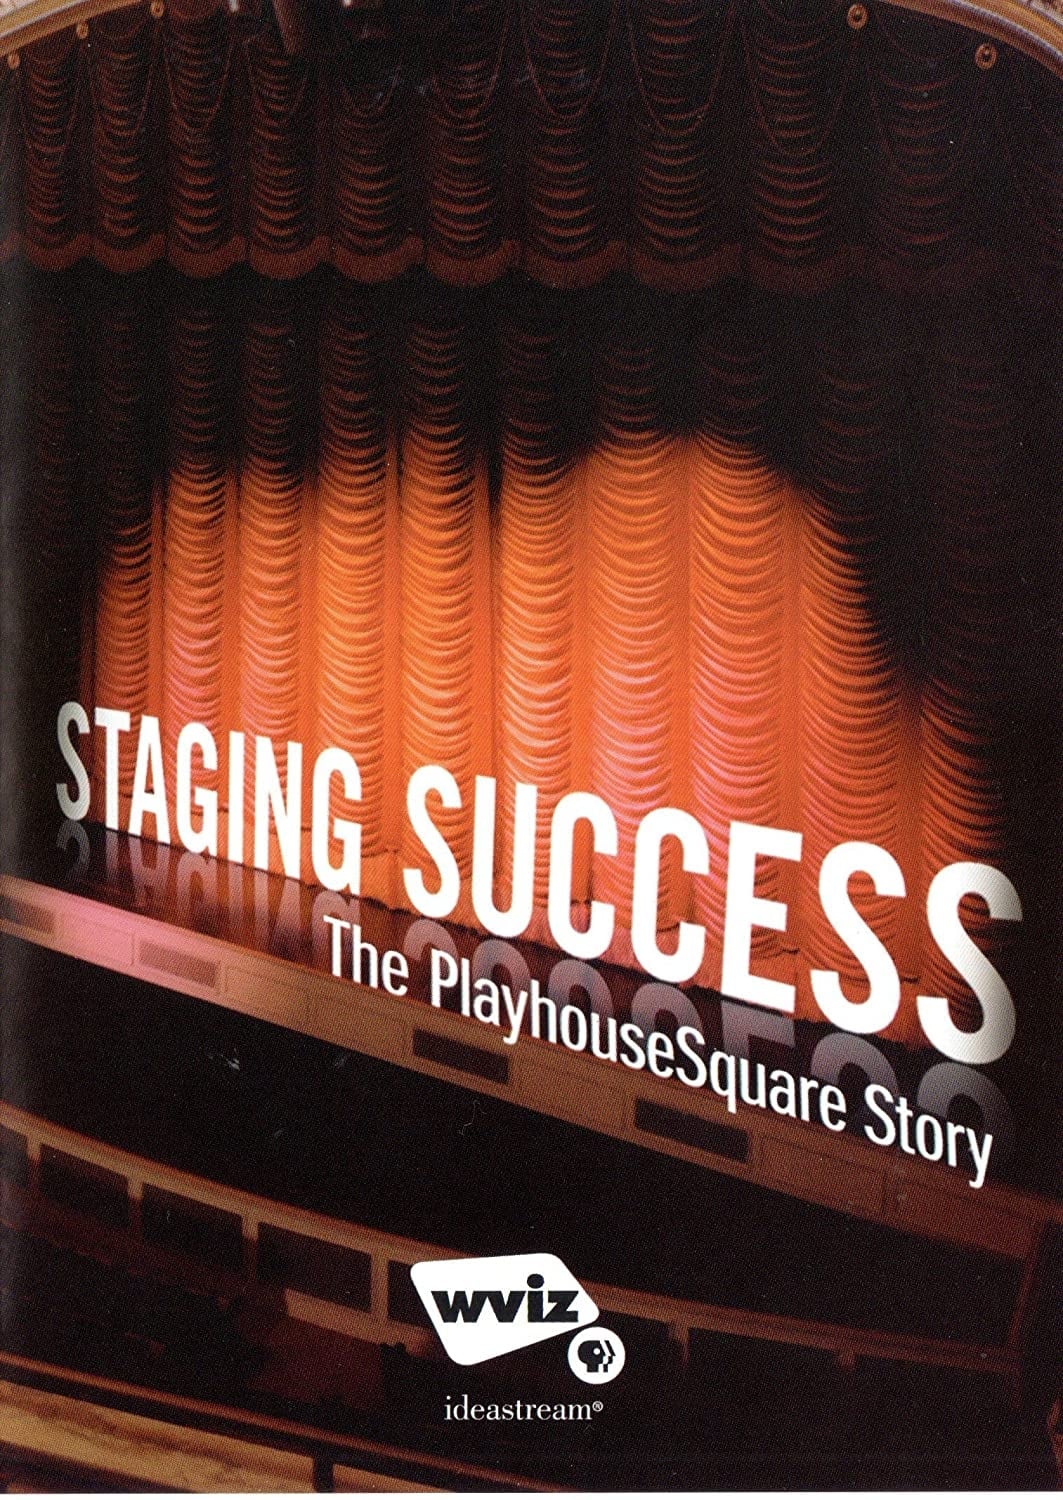 Staging Success: The PlayhouseSquare Story